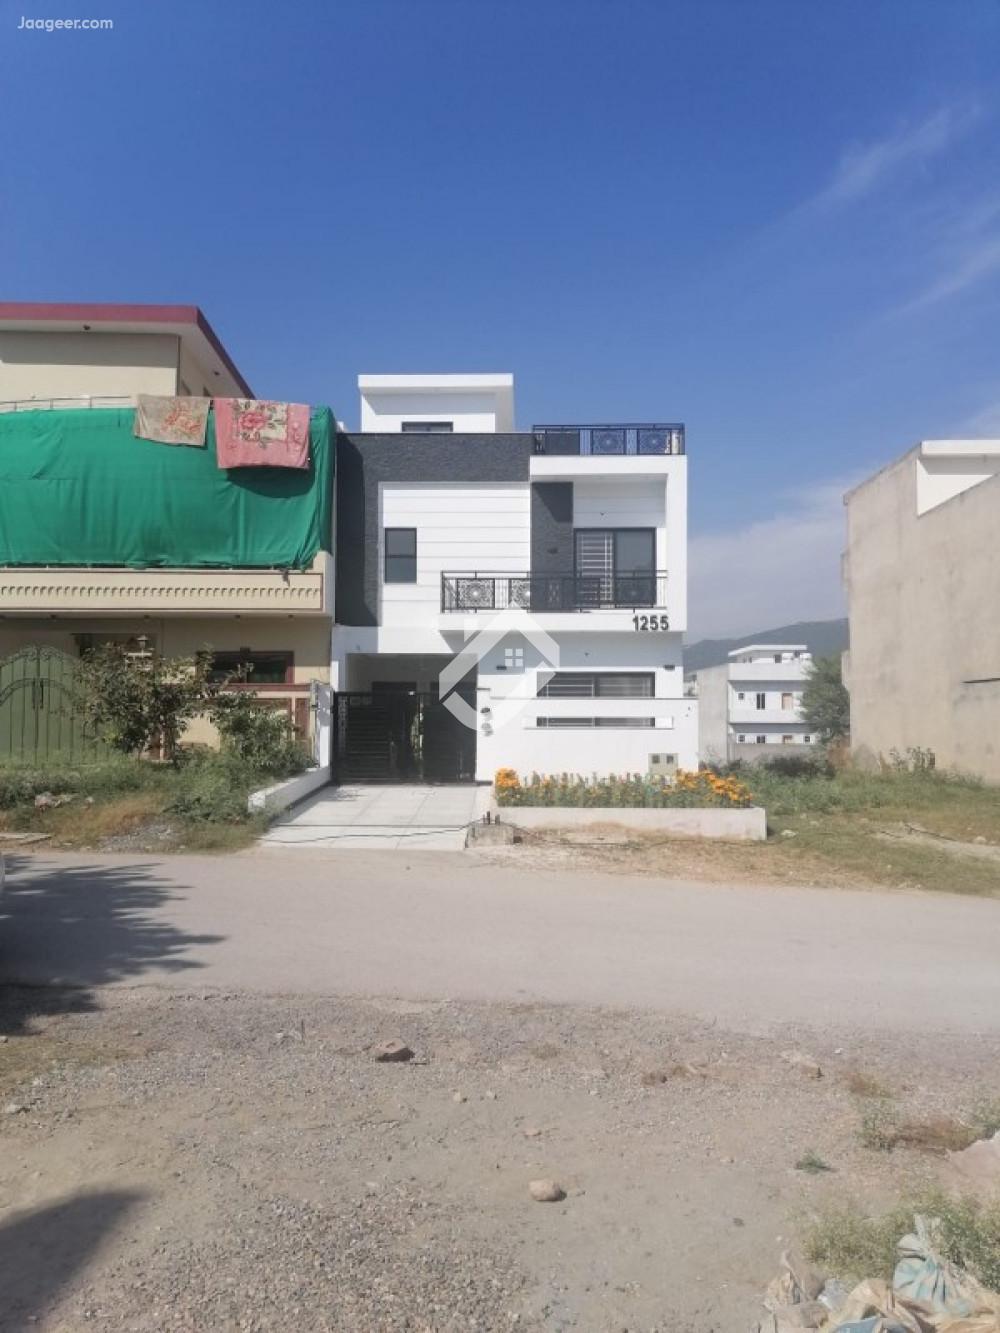 Main image 5 Marla Double Storey For Sale In D-12/1 D-12/1, Islamabad